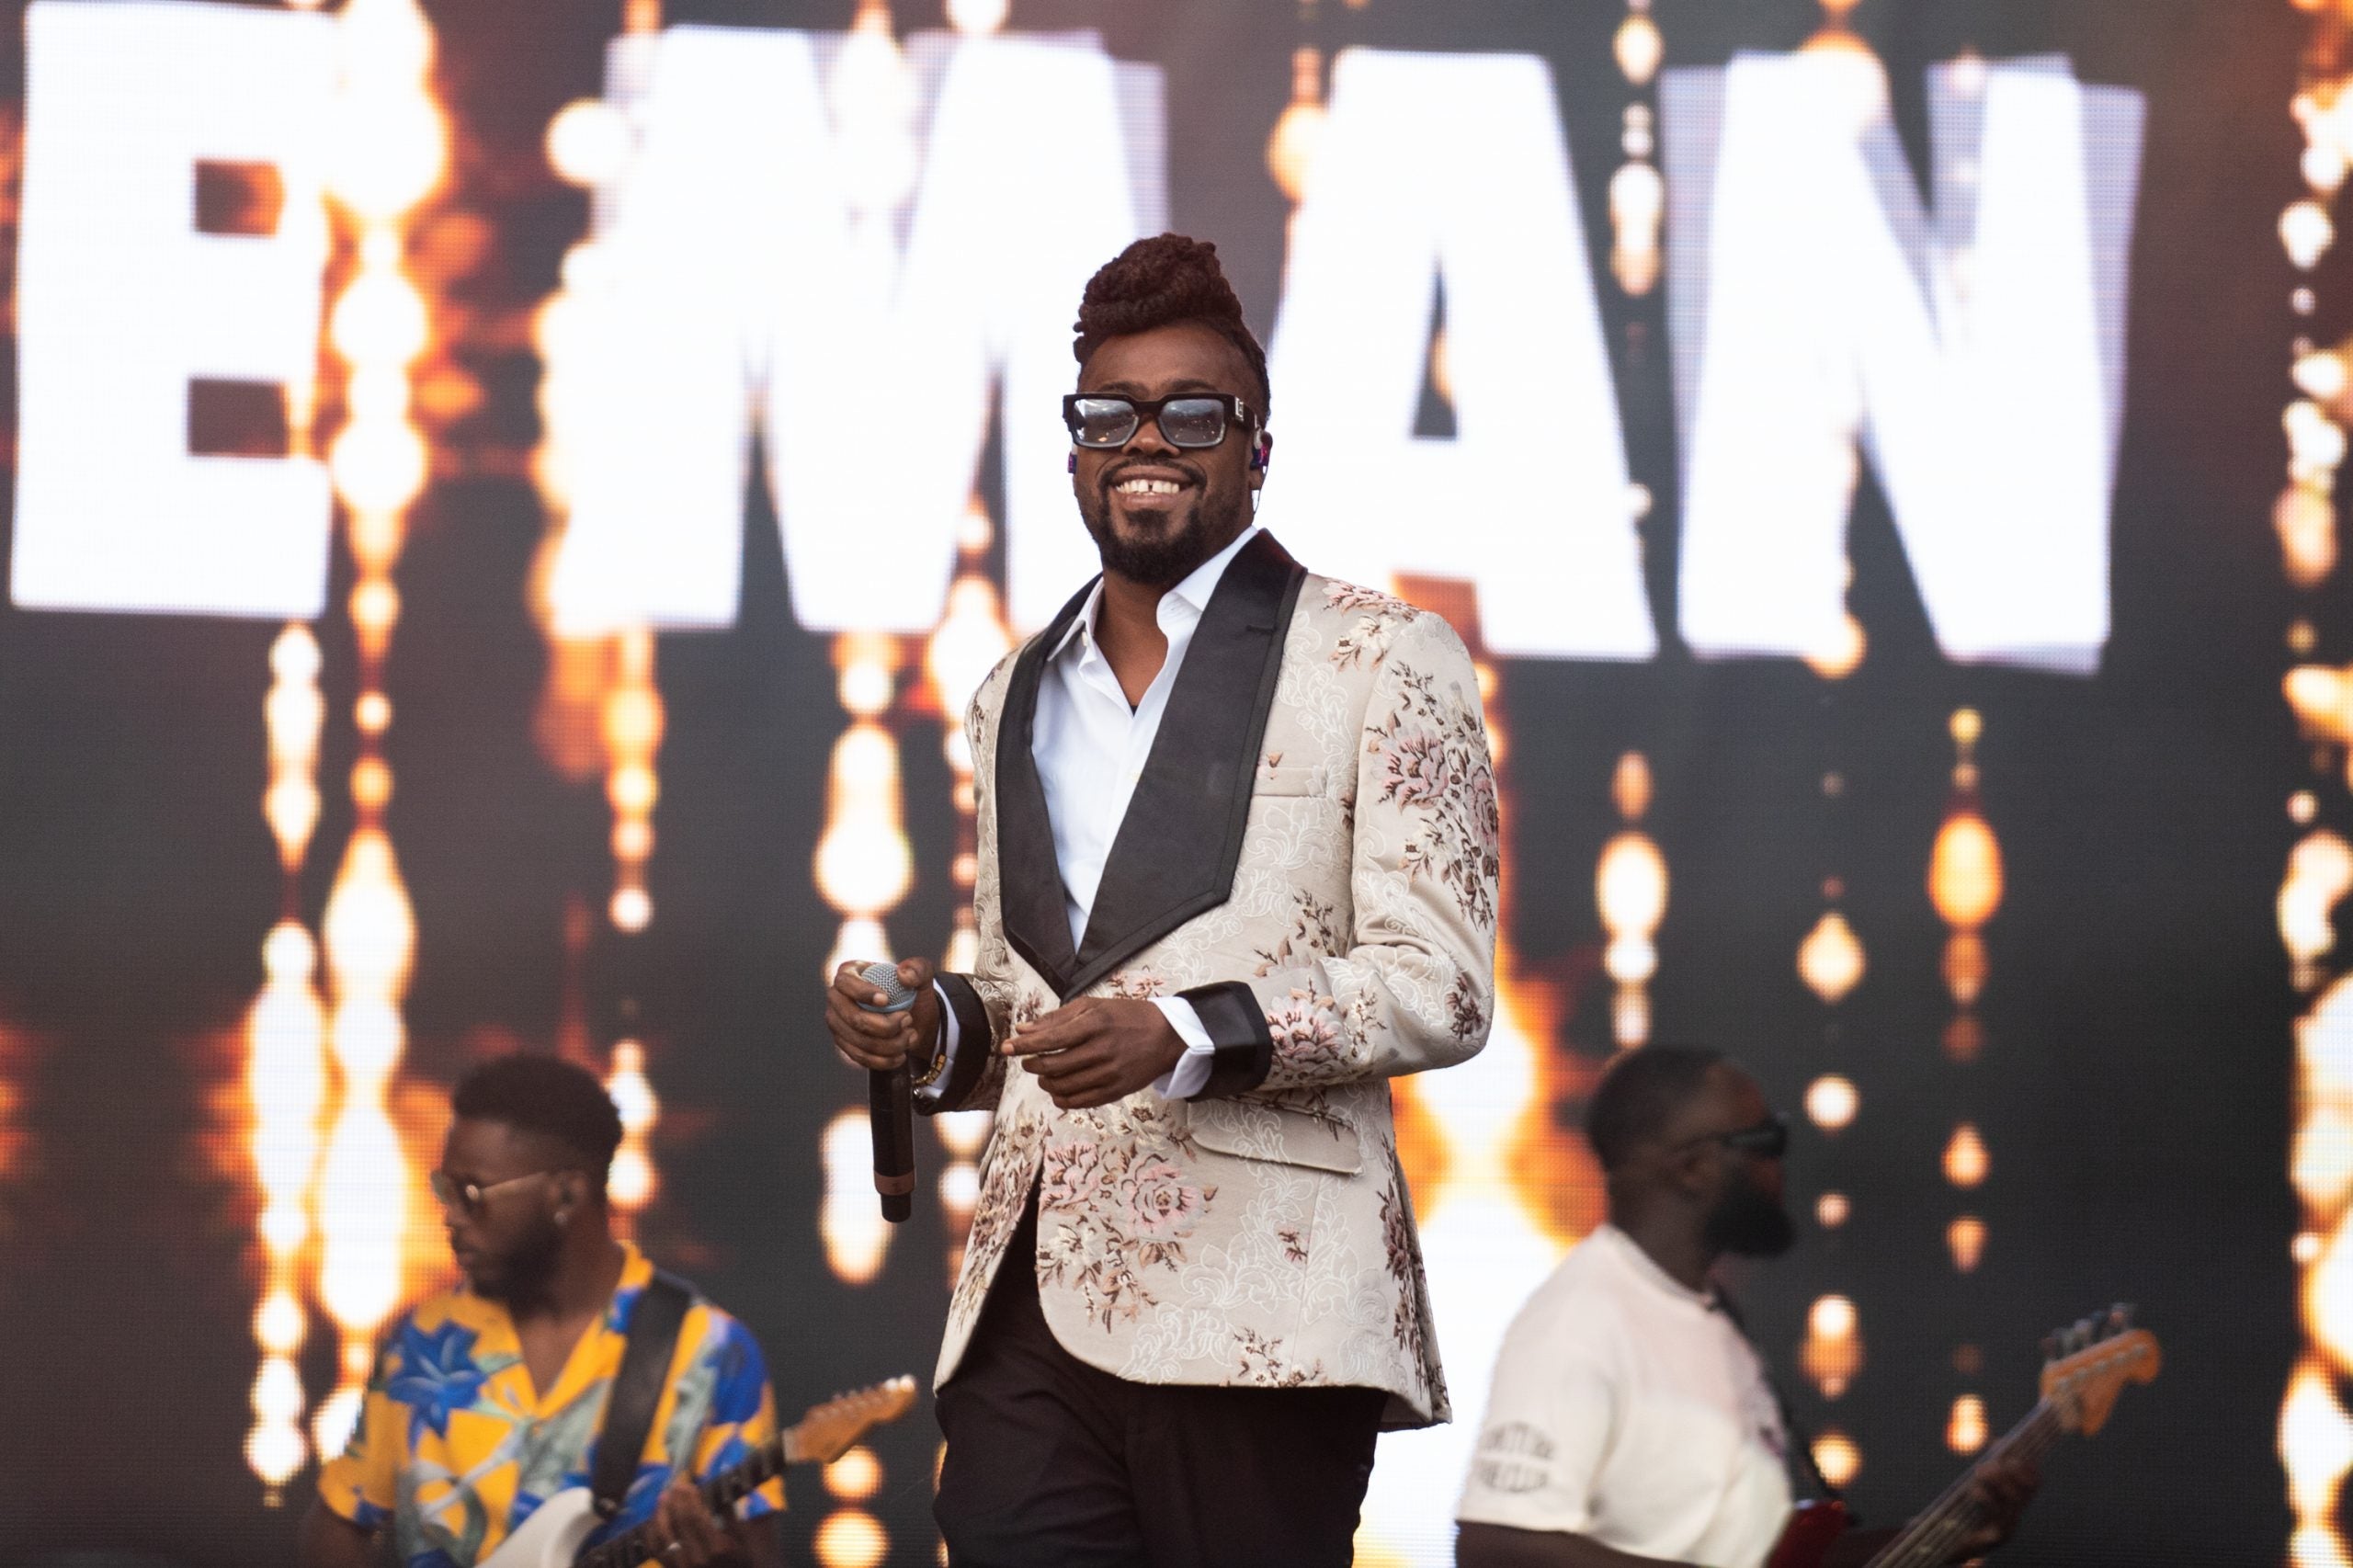 Beenie Man Surprises Passengers On Plane With An Impromptu Performance